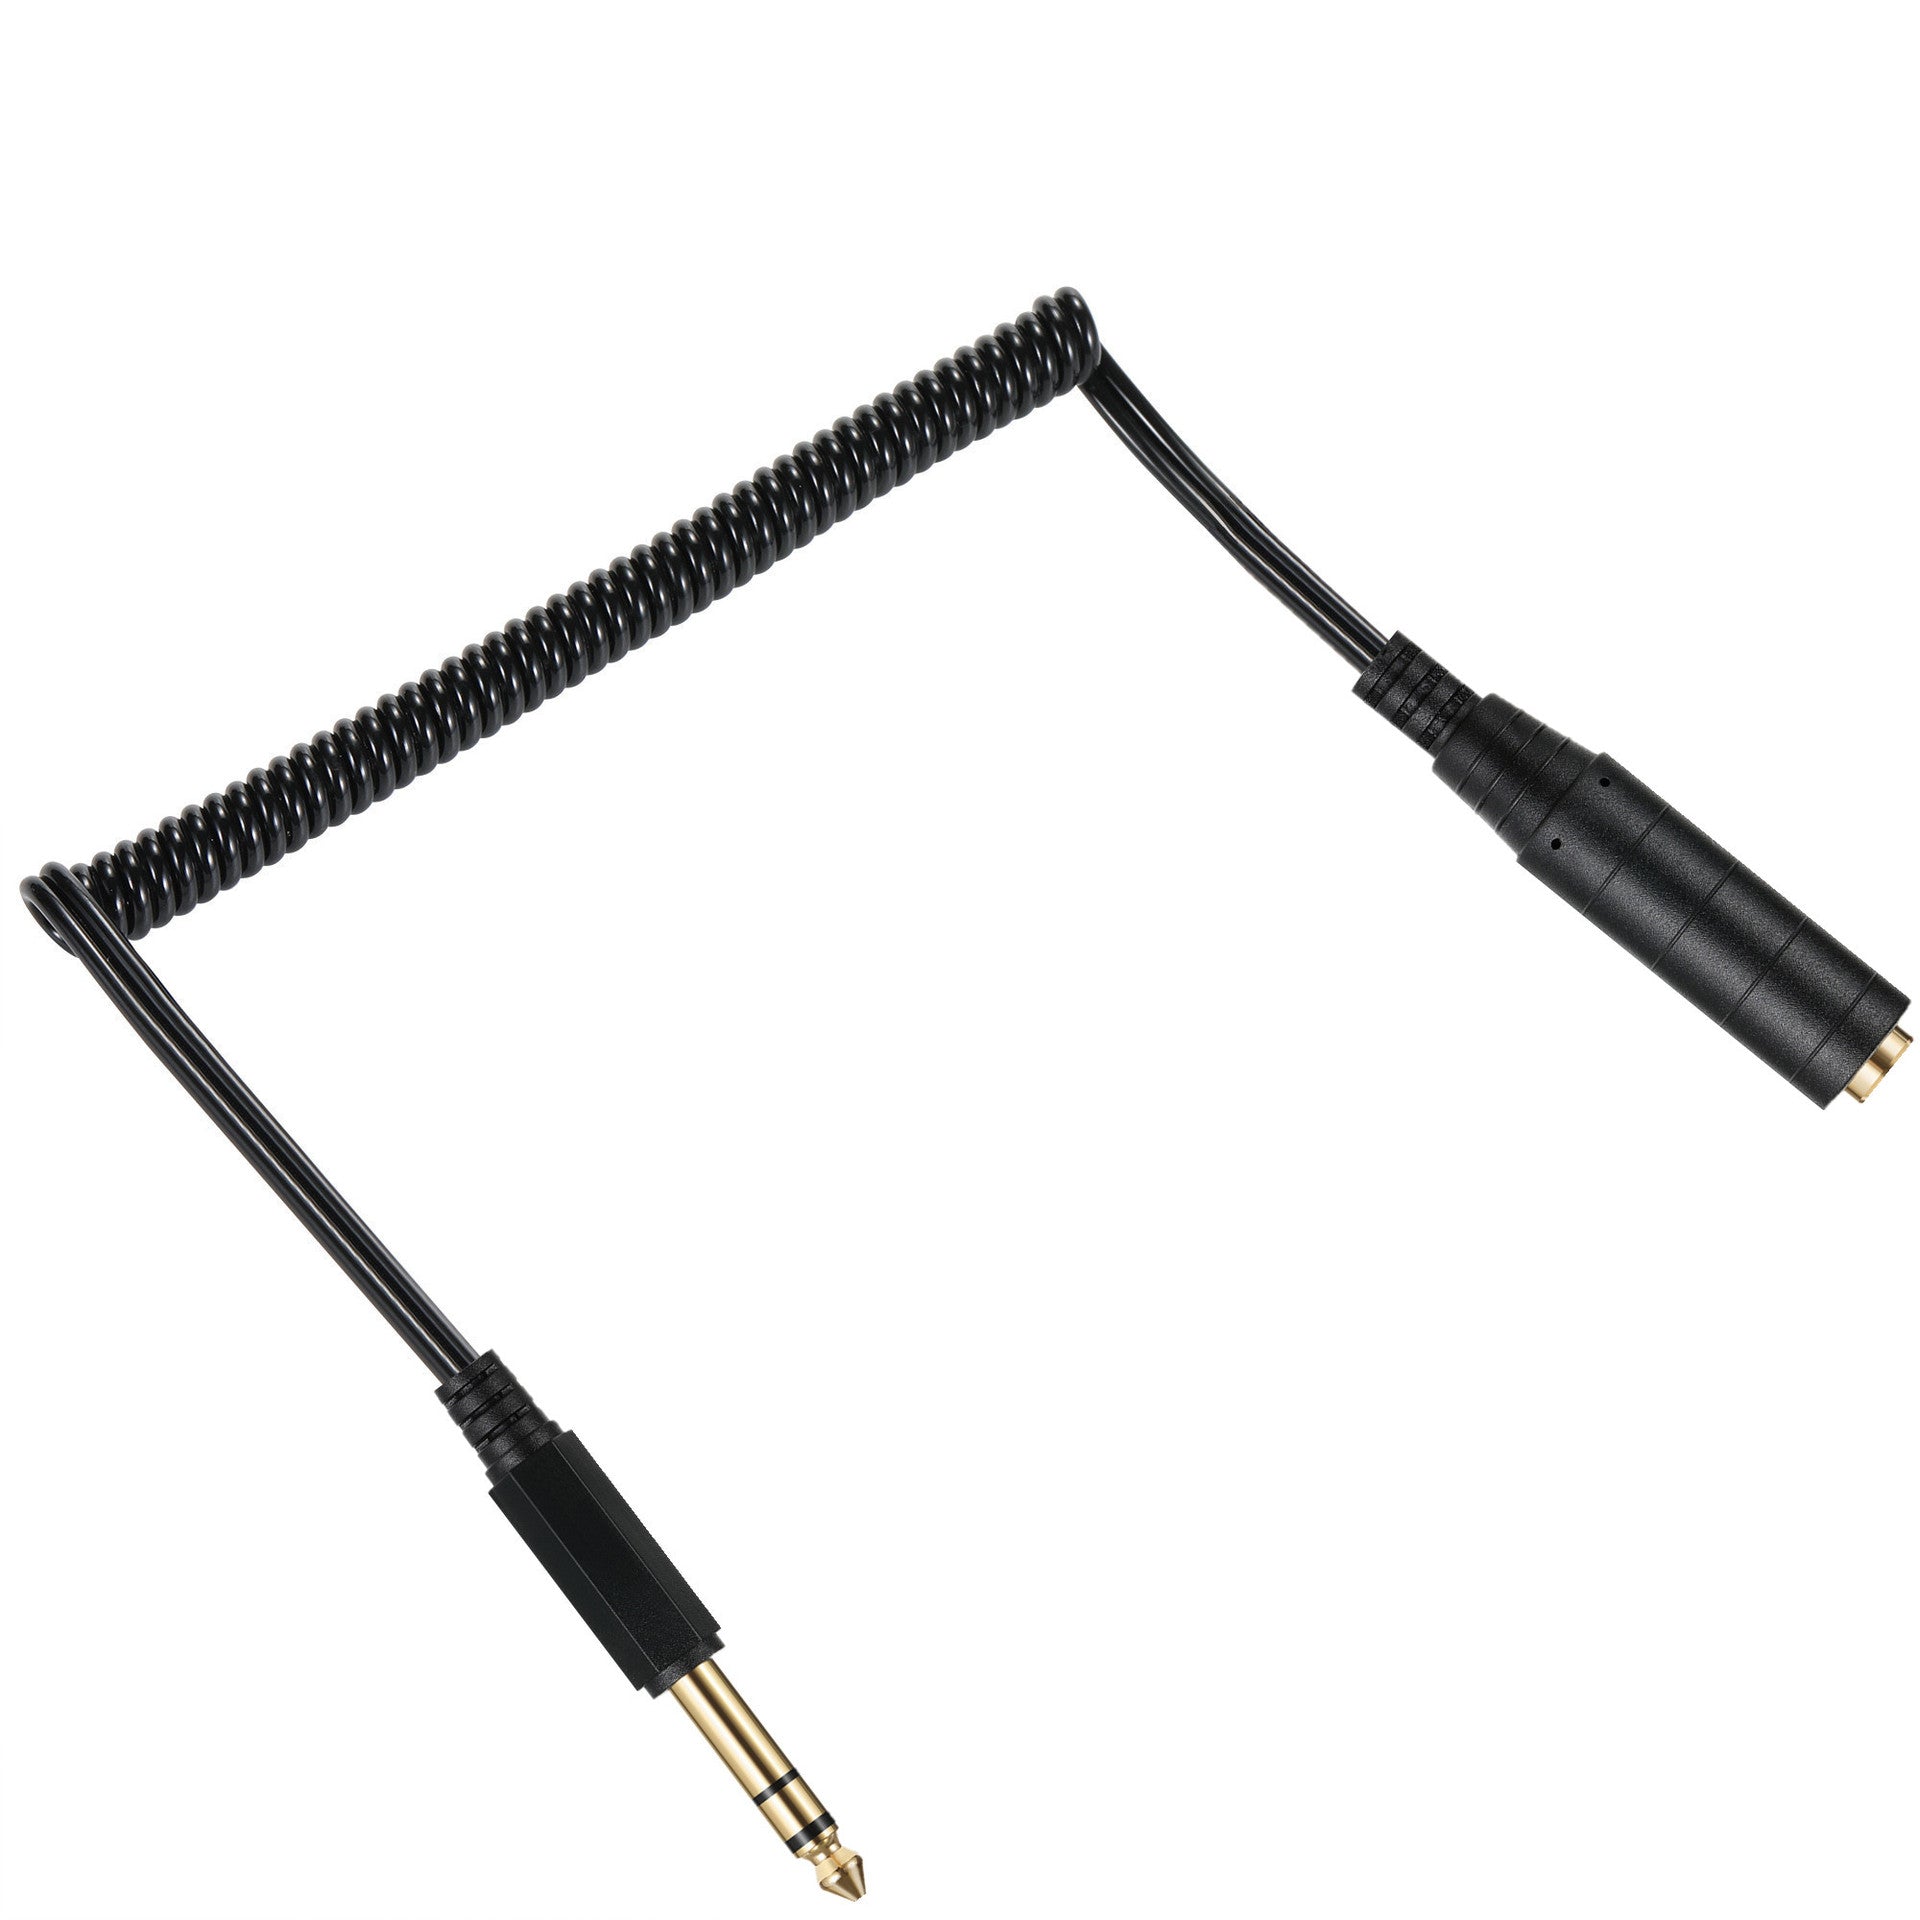 6.35mm 1/4 inch TRS Stereo Male to Female Audio Coiled Extension Cable